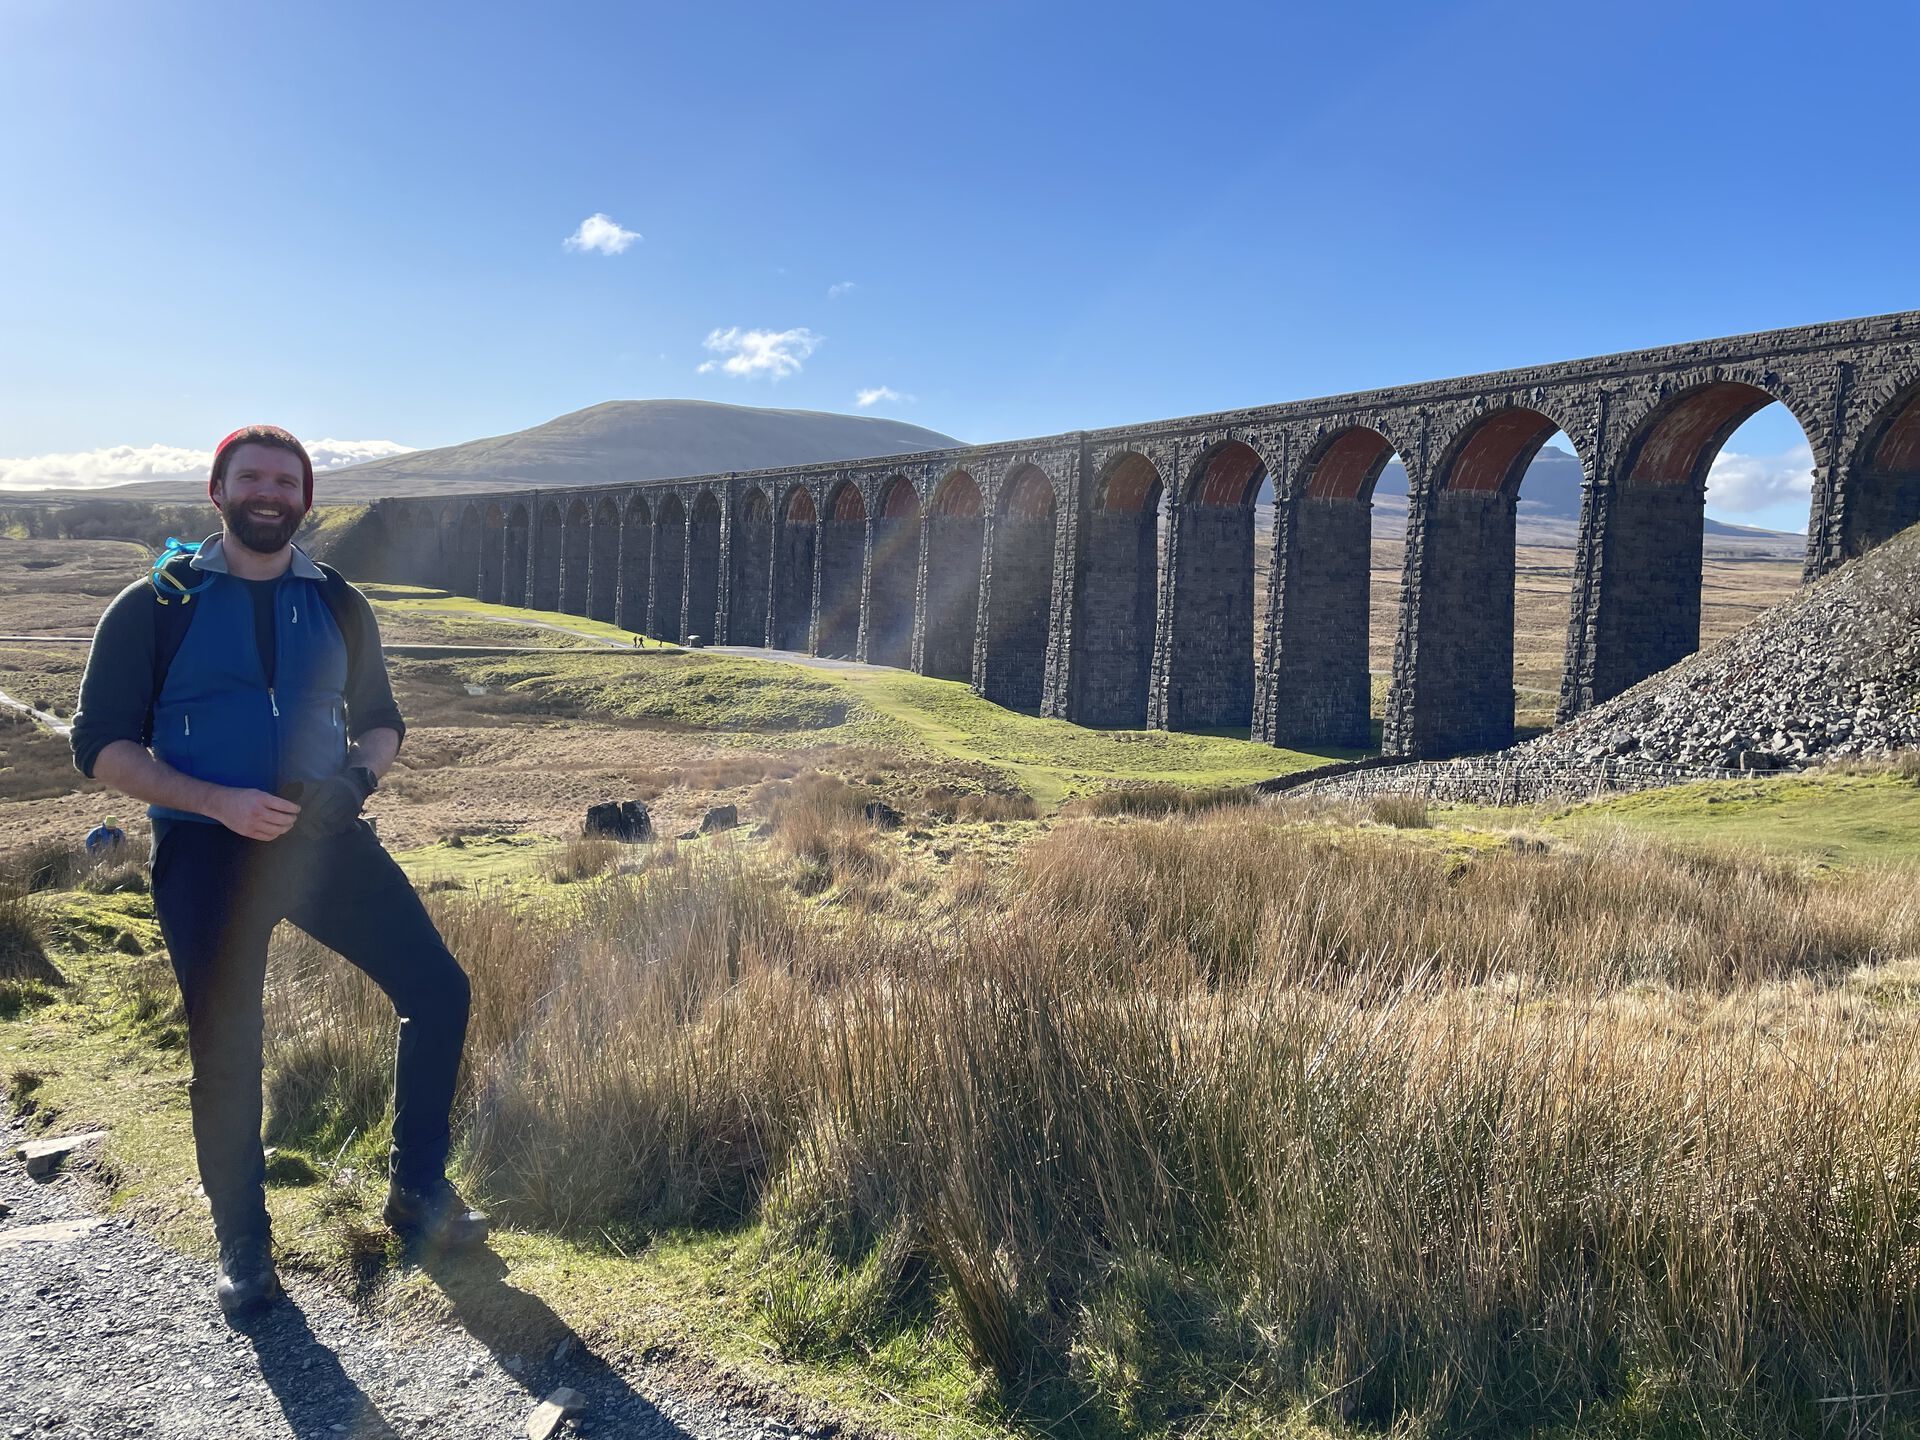 Yours truly at Ribblehead Viaduct on the Yorkshire Three Peaks trail